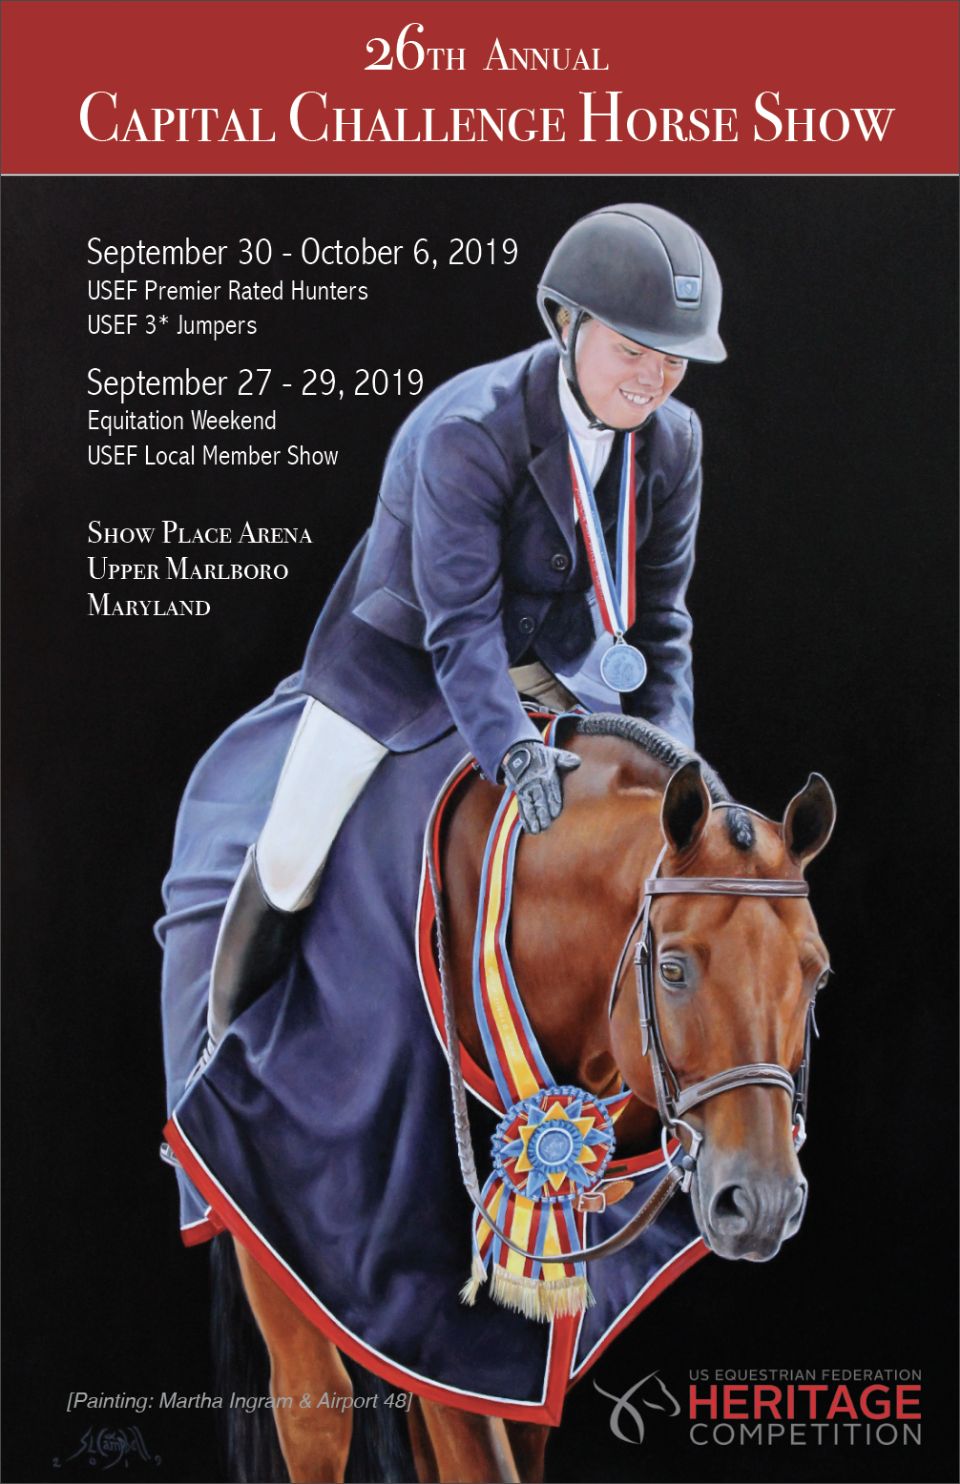 Capital Challenge Horse Show Prize List Now Available With Entries Open